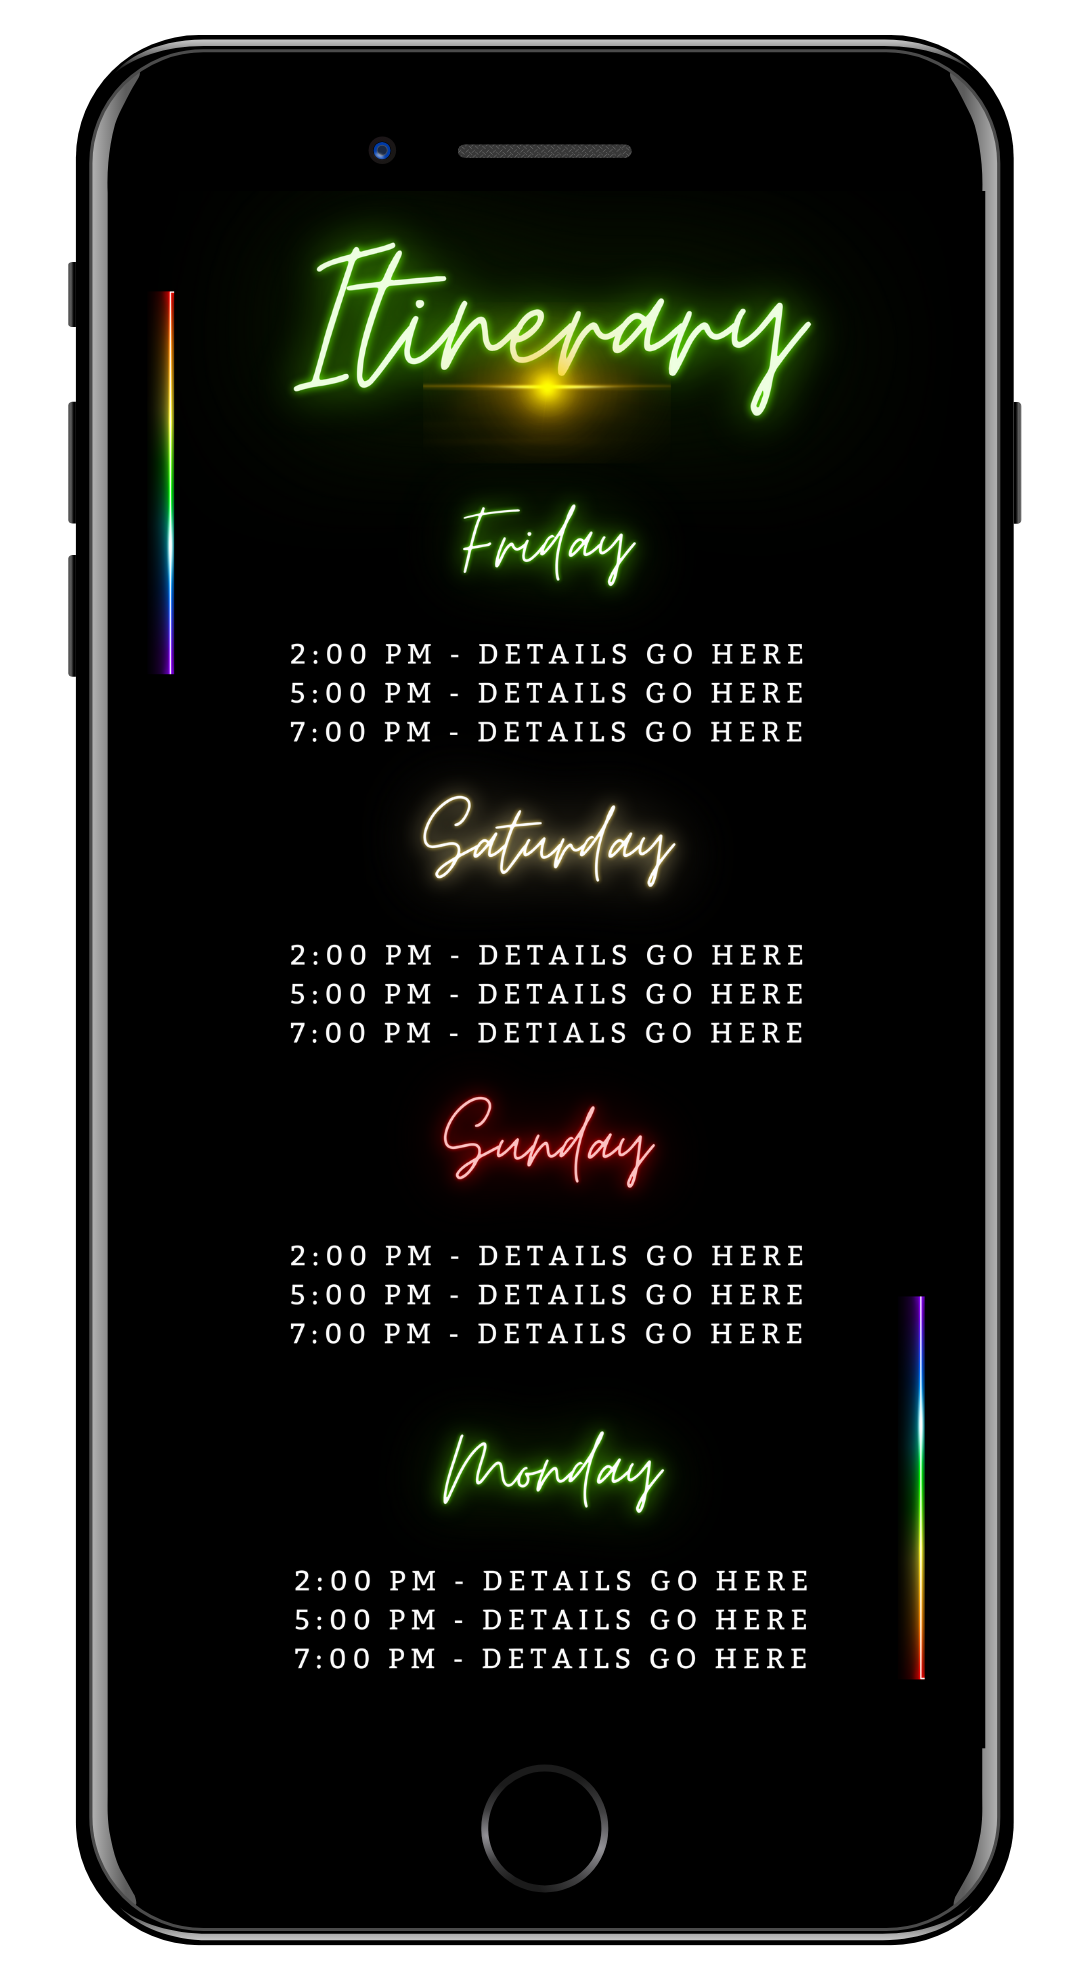 Jamaica Colourful Neon | Getaway Party Evite displayed on a smartphone screen with customizable text and neon-themed design elements.